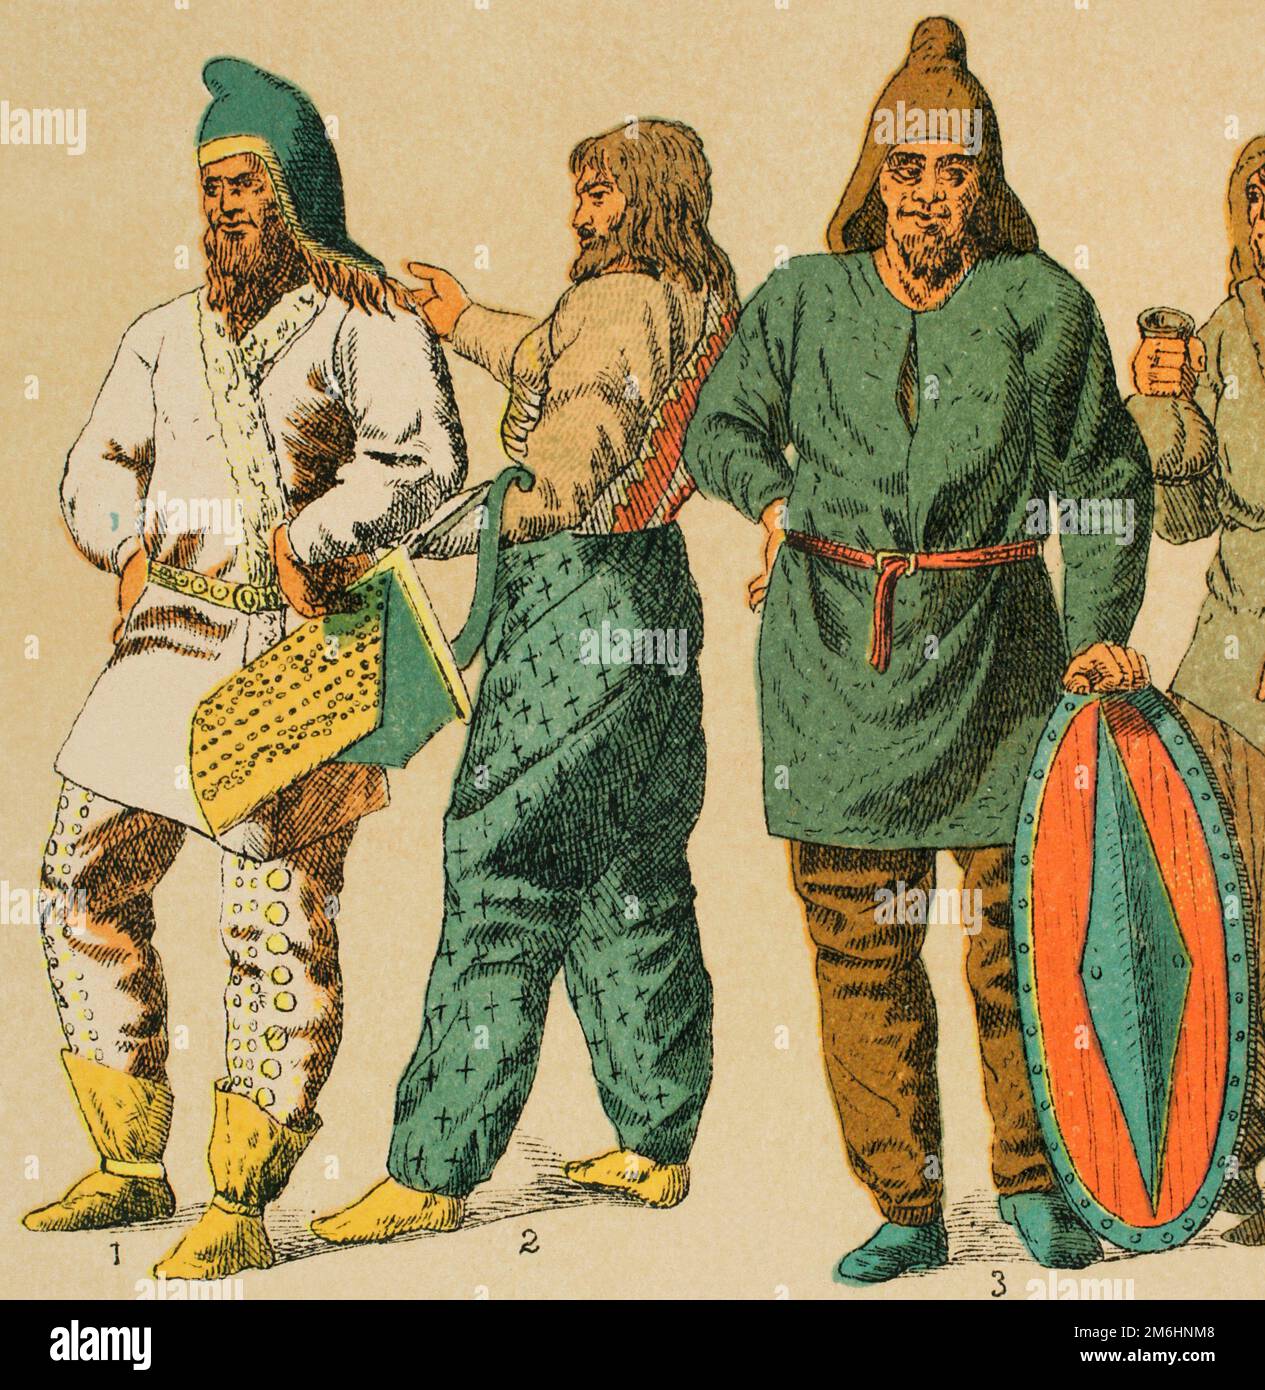 Near East. Scythians and Parthians. From left to right; 1: male Scythian garment, 2: male nuanced girdle, 3: men of the popular classes. Chromolithography. "Historia Universal" (Universal History), by Cesar Cantu. Volume I, 1881. Stock Photo